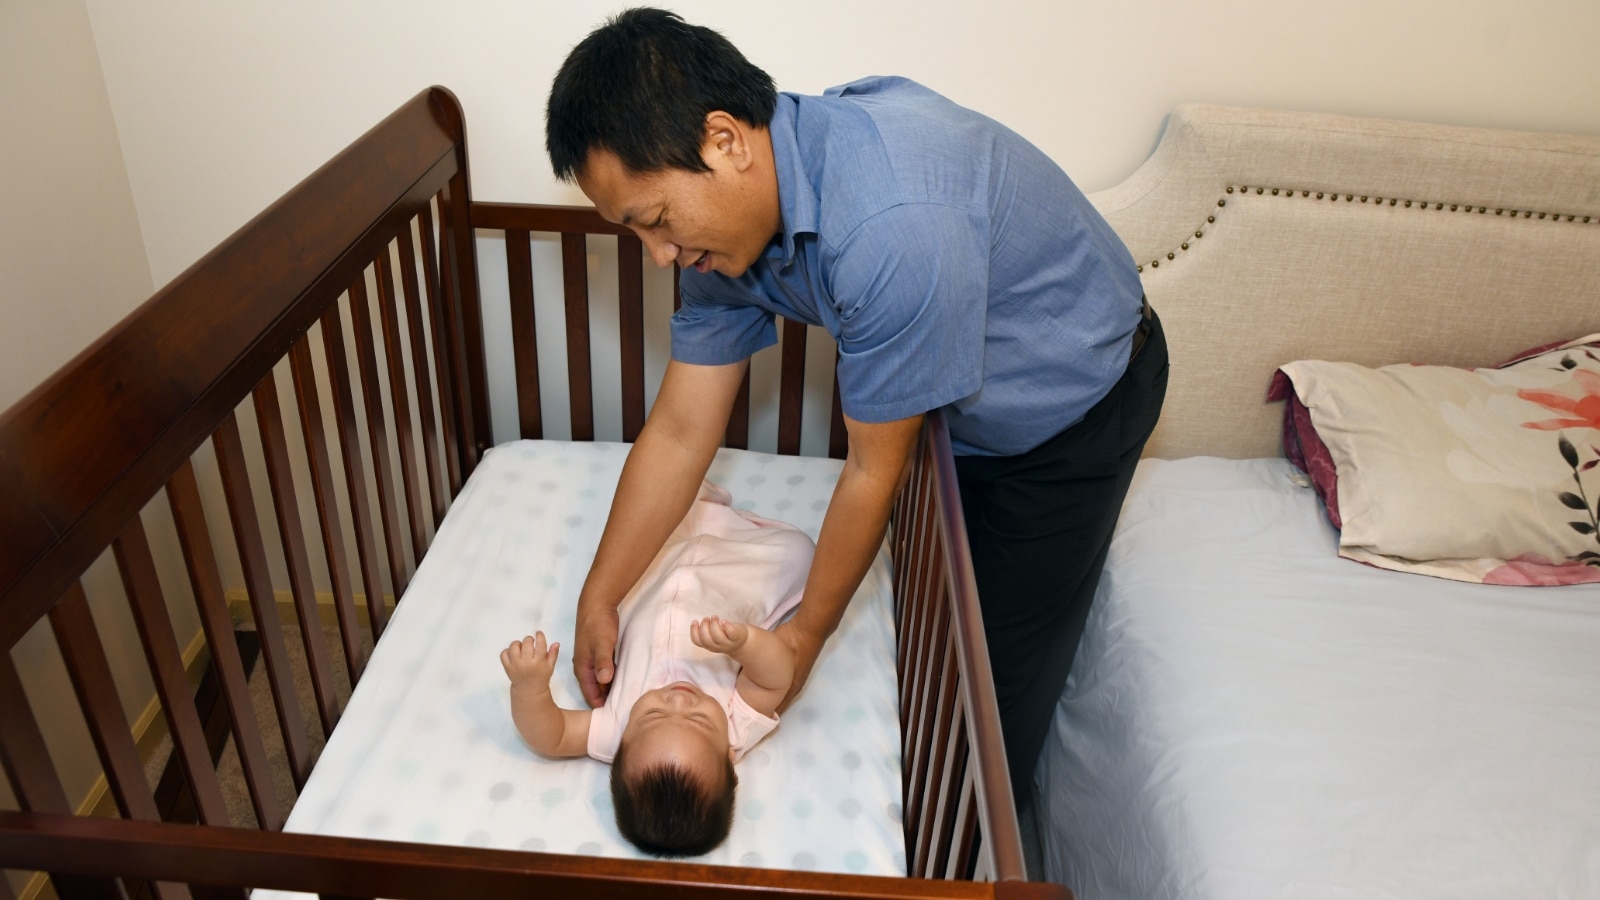 A caring man assists a baby in a crib, ensuring a safe sleeping environment for the little one